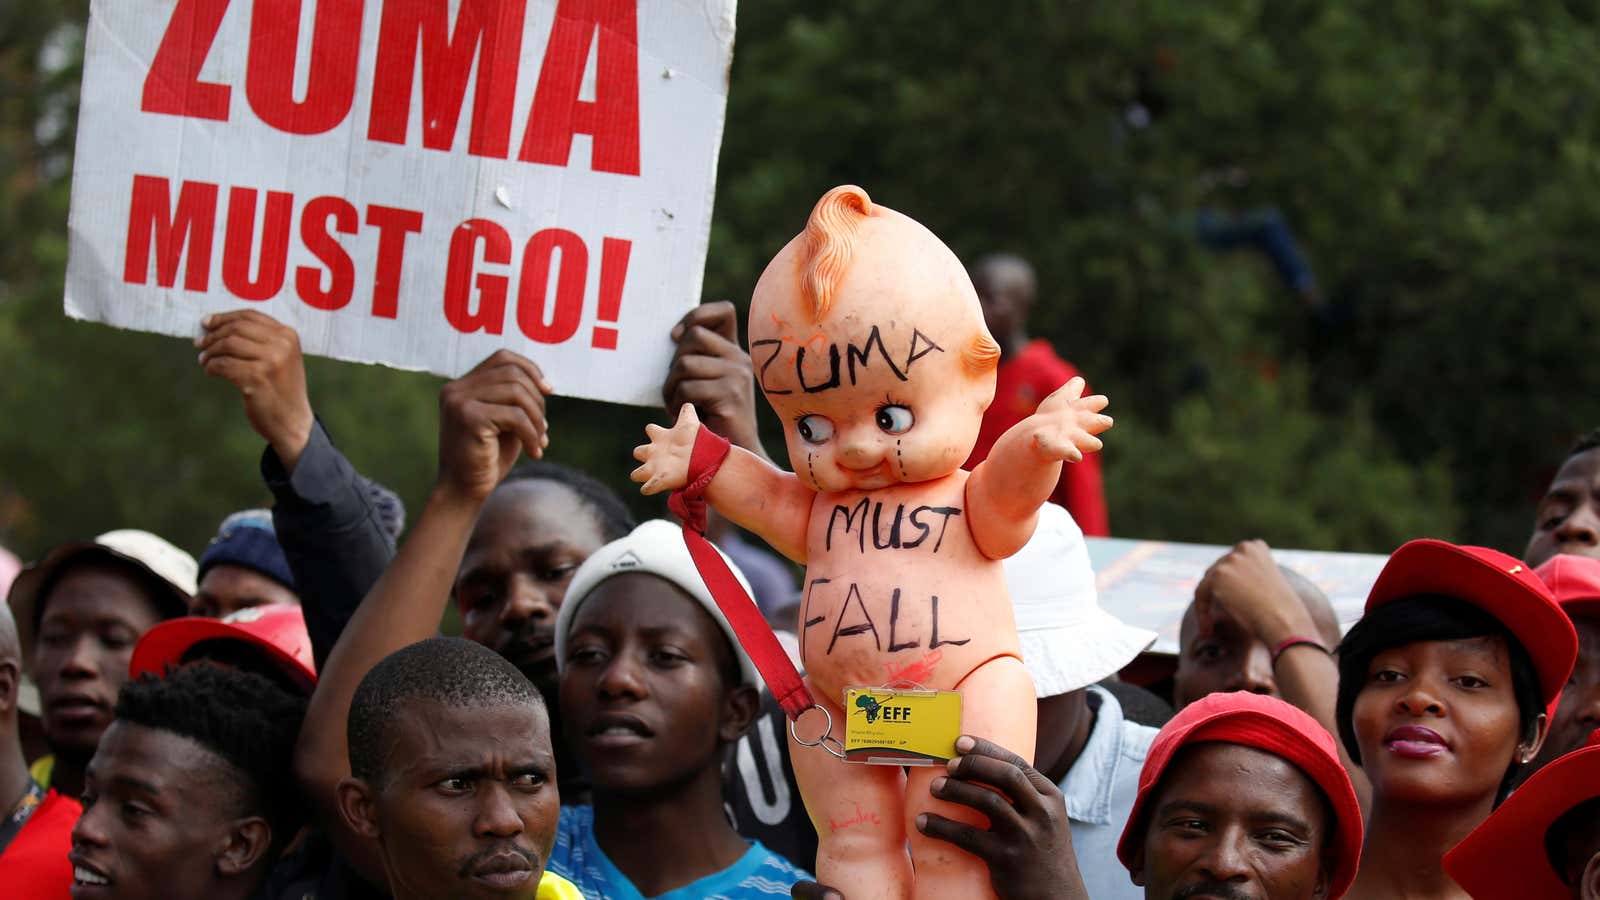 Protesters call for the removal of President Jacob Zuma outside the Union Buildings in Pretoria, South Africa, November 2, 2016. REUTERS/Mike Hutchings – RTX2RJRX